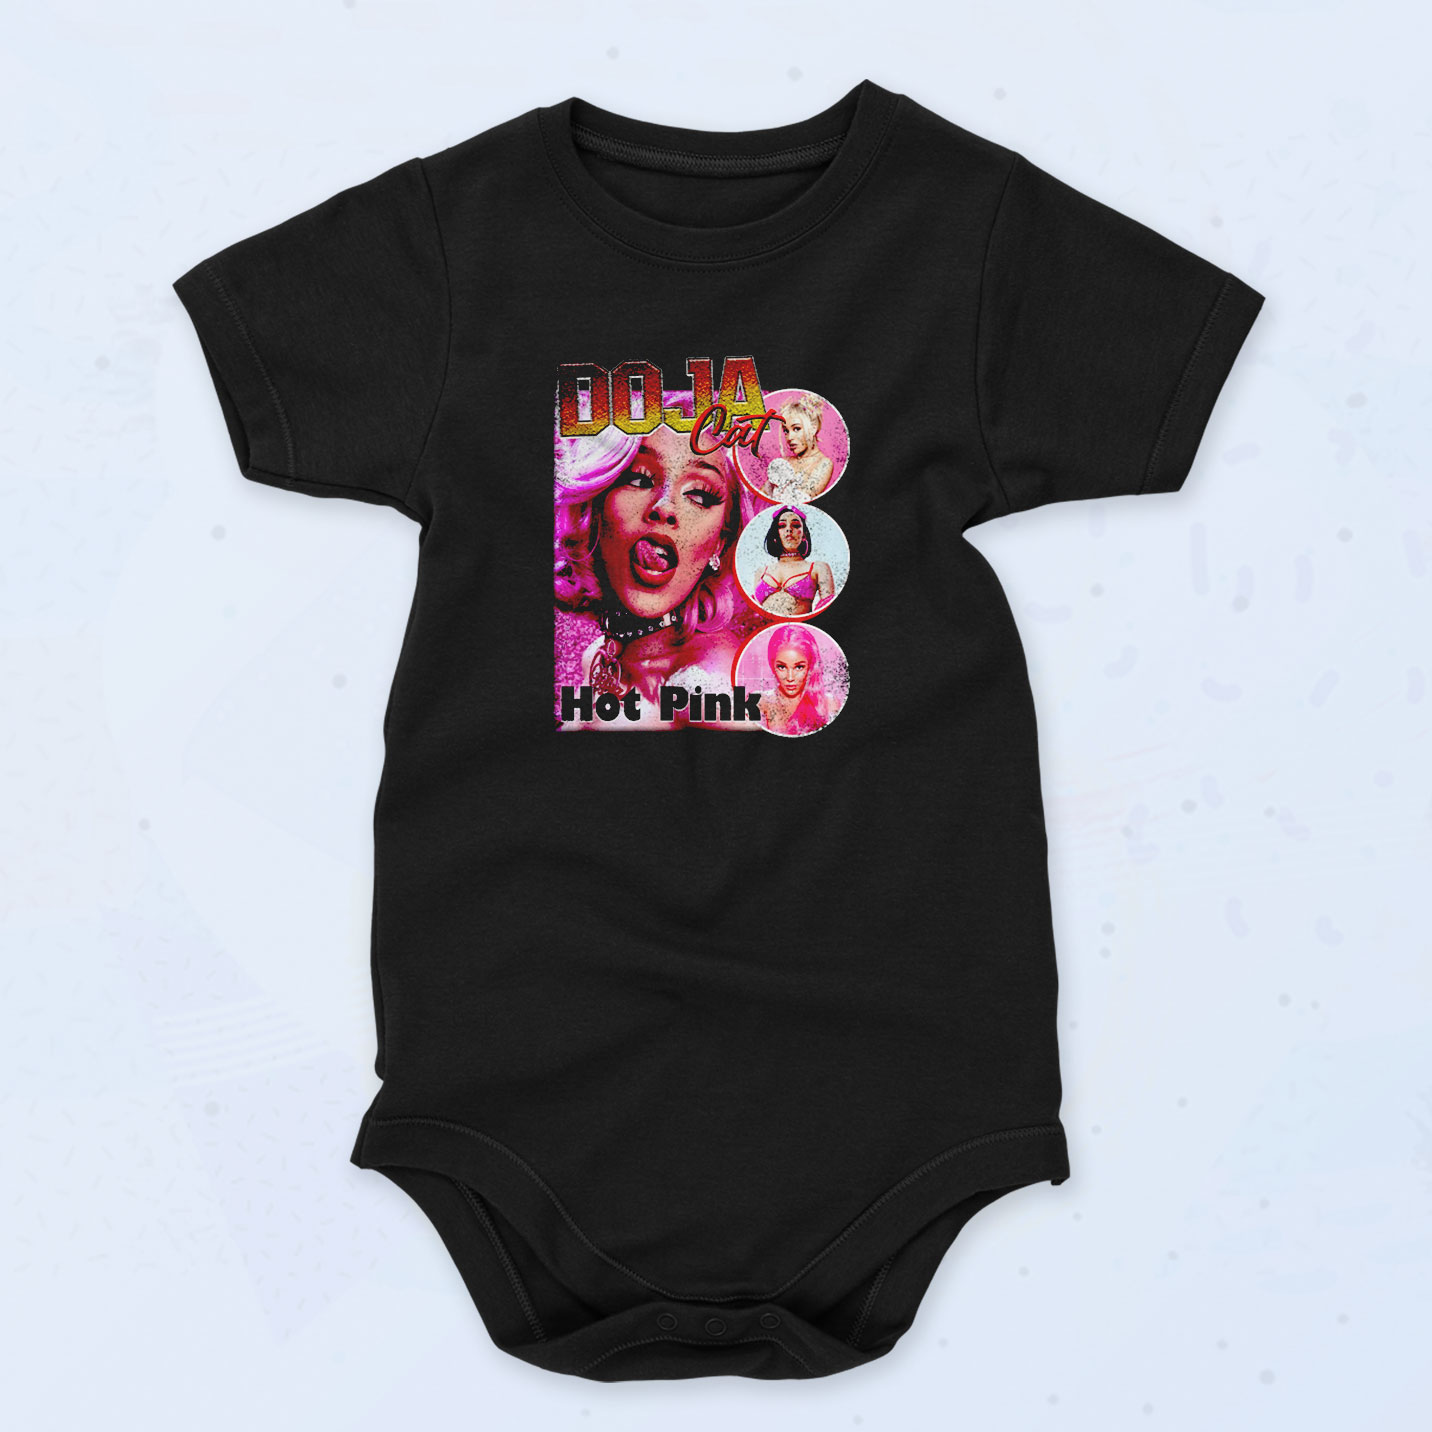 Vintage Doja Cat Hot Pink 90s Baby Onesies, Baby Clothes - 90sclothes.com